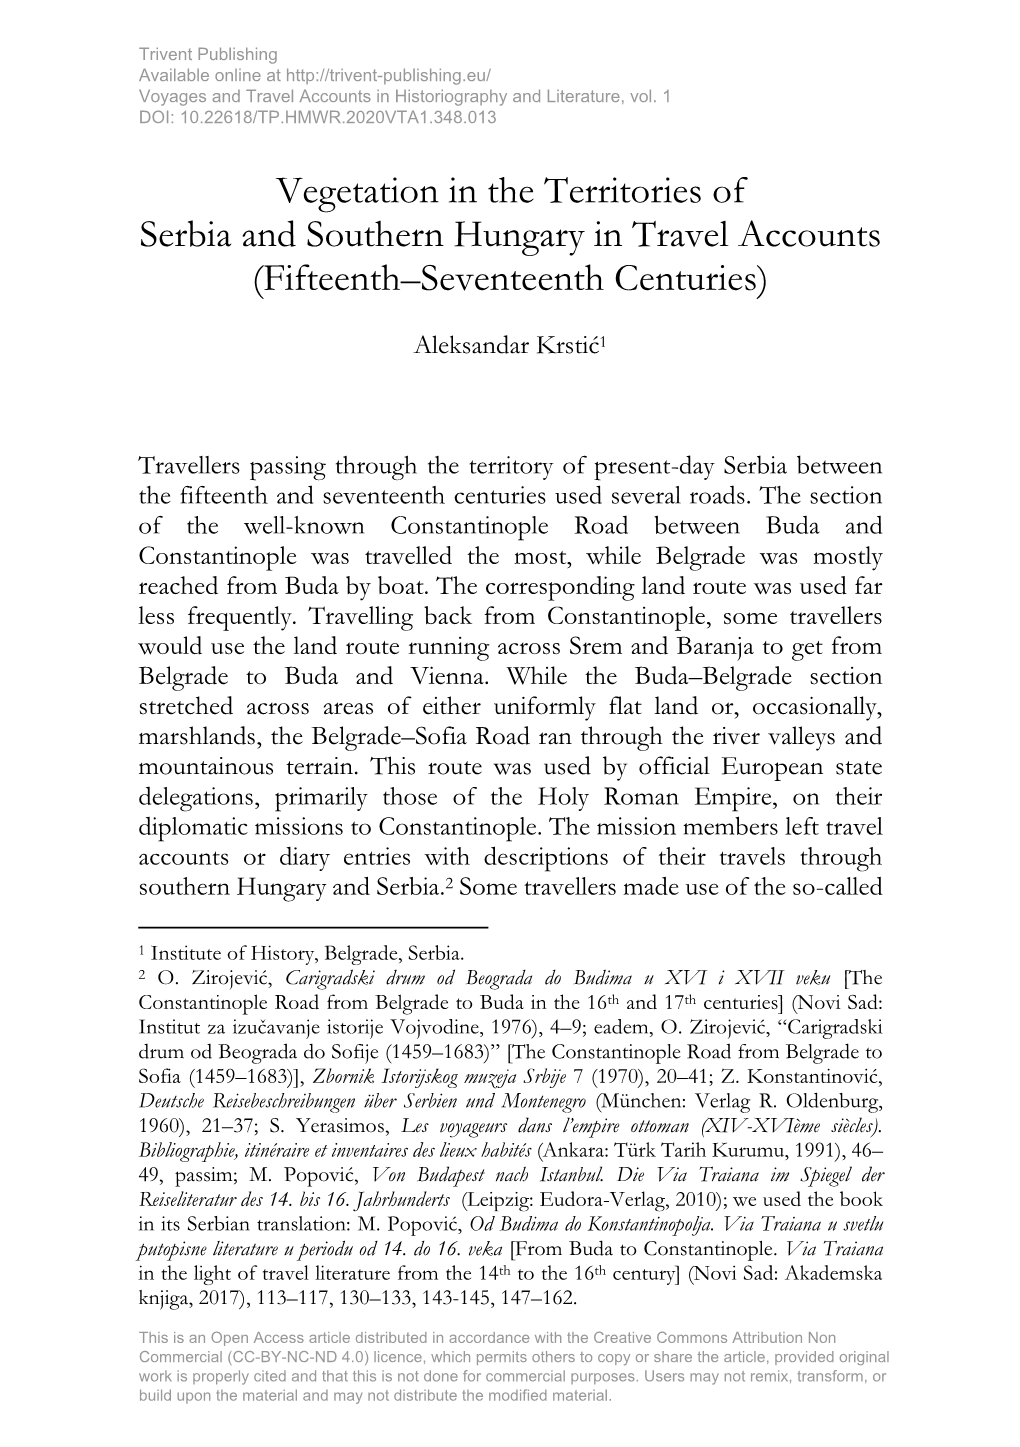 Vegetation in the Territories of Serbia and Southern Hungary in Travel Accounts (Fifteenth–Seventeenth Centuries)